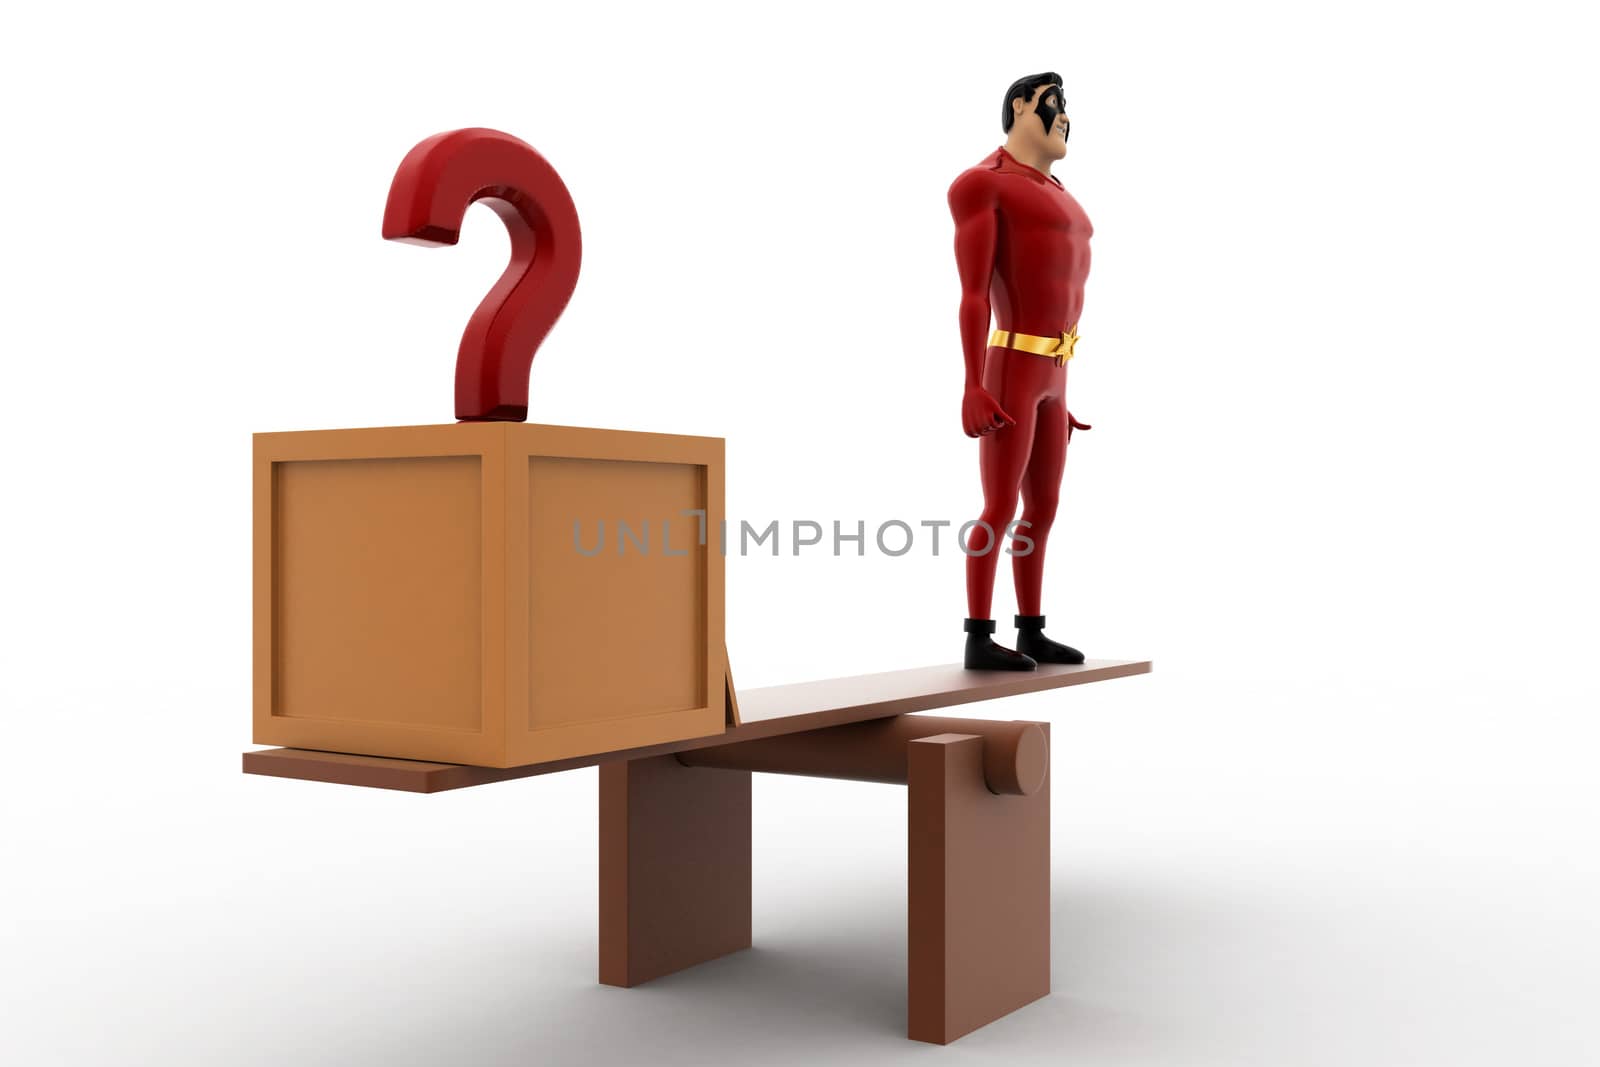 3d superhero with question mark and standing on seesaw for balance concept on white background,  side angle view